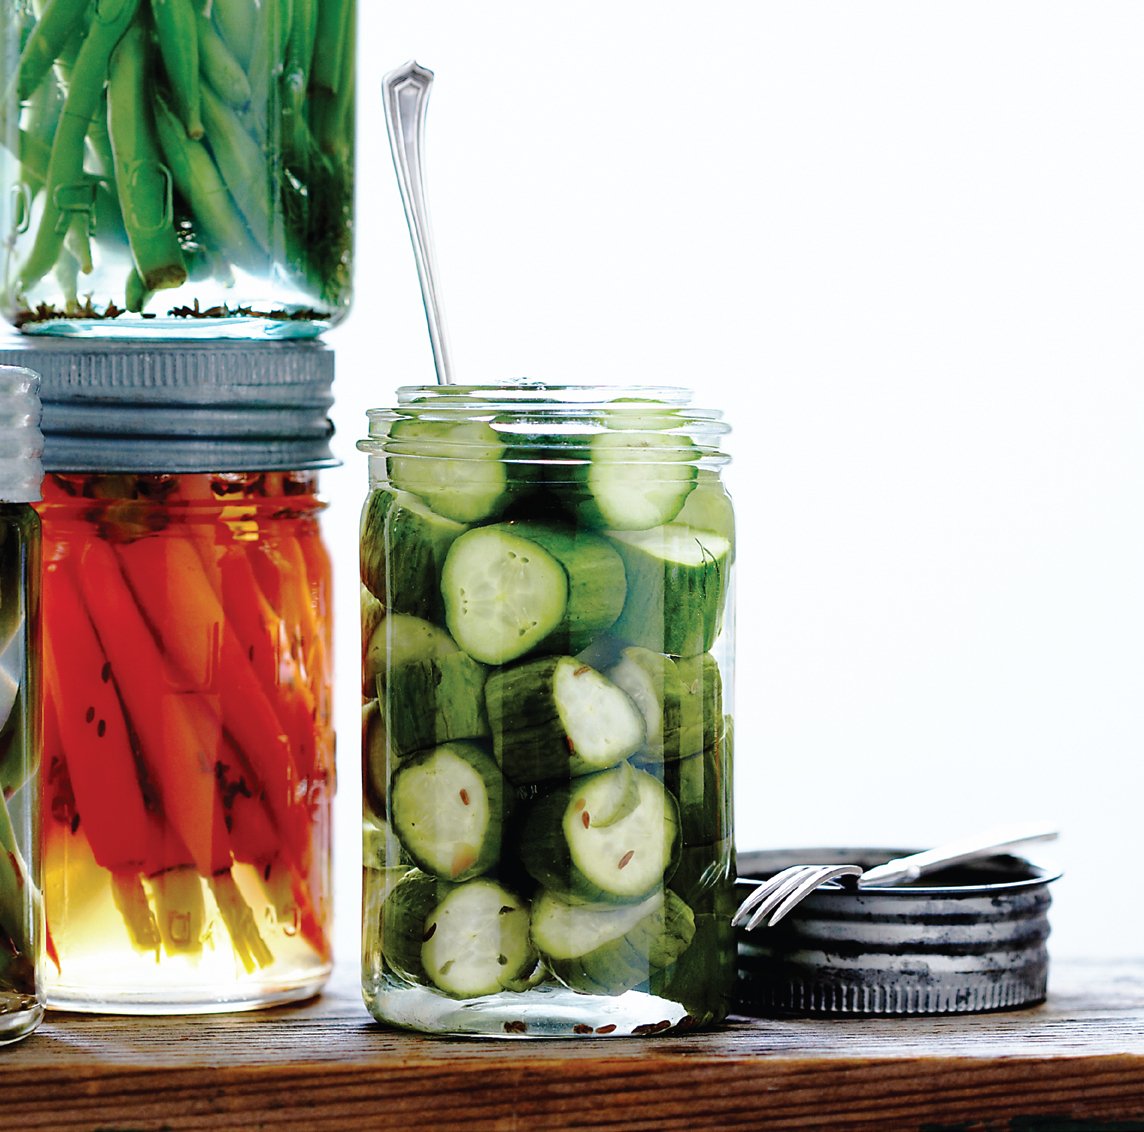 how to pickle fruits and vegetables, preserved pickling, canning